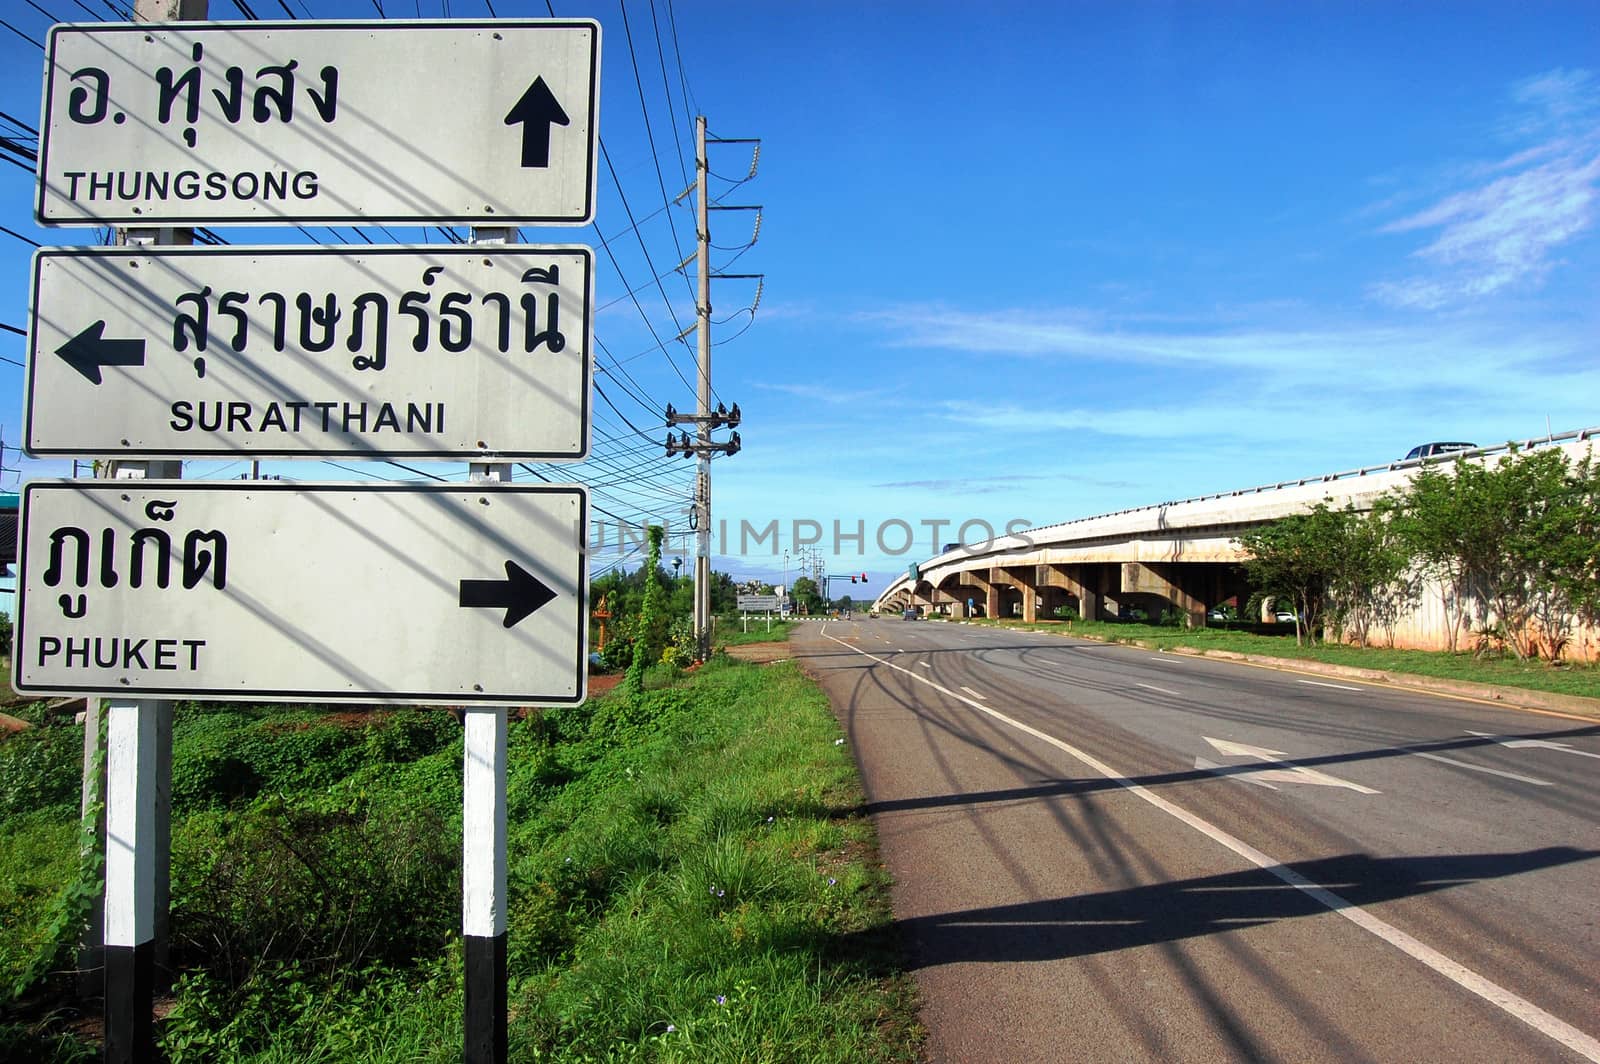 Direction road sign at Thailand